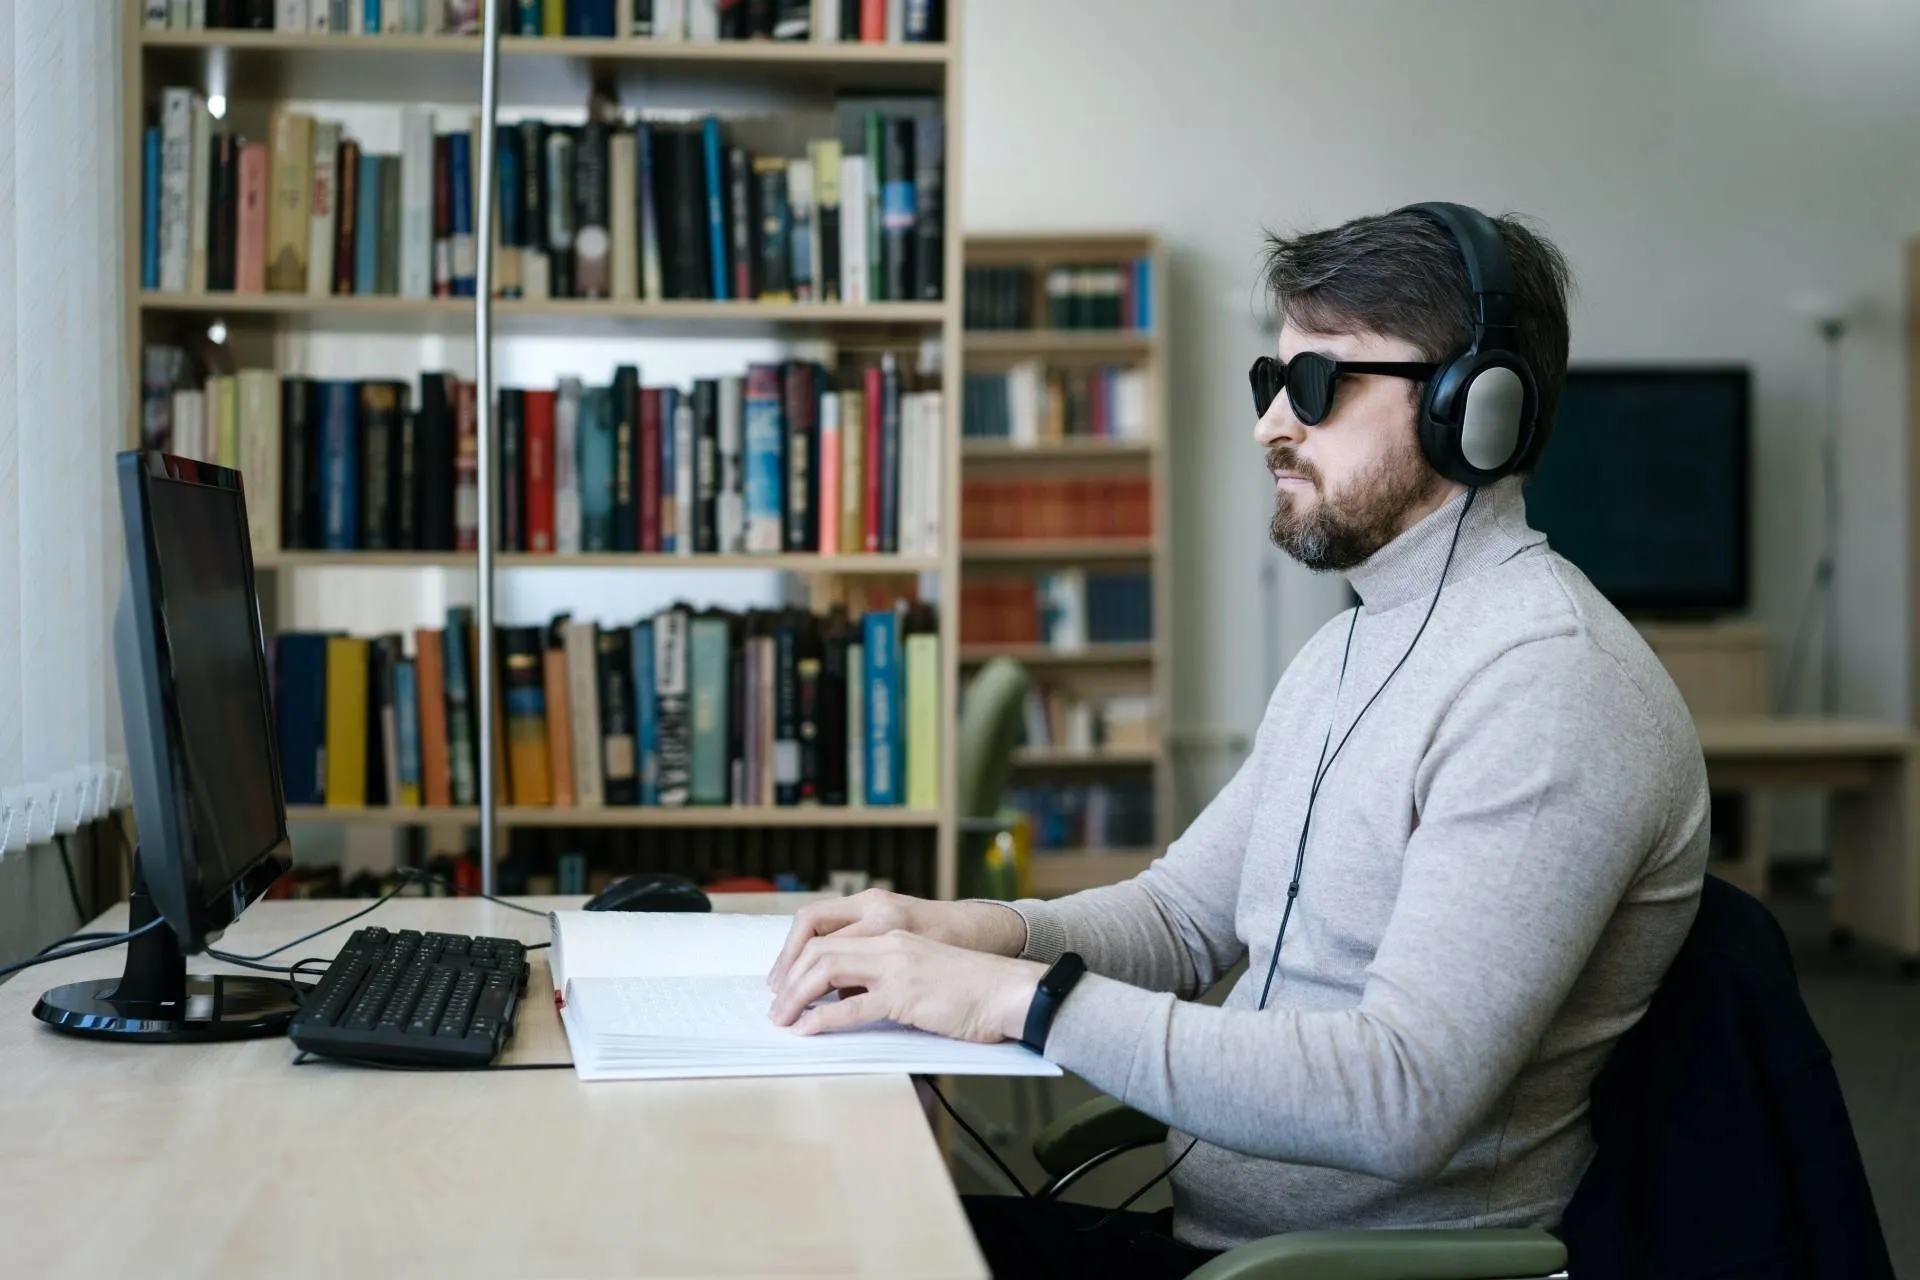 A man wearing headphones and sitting at a desk.